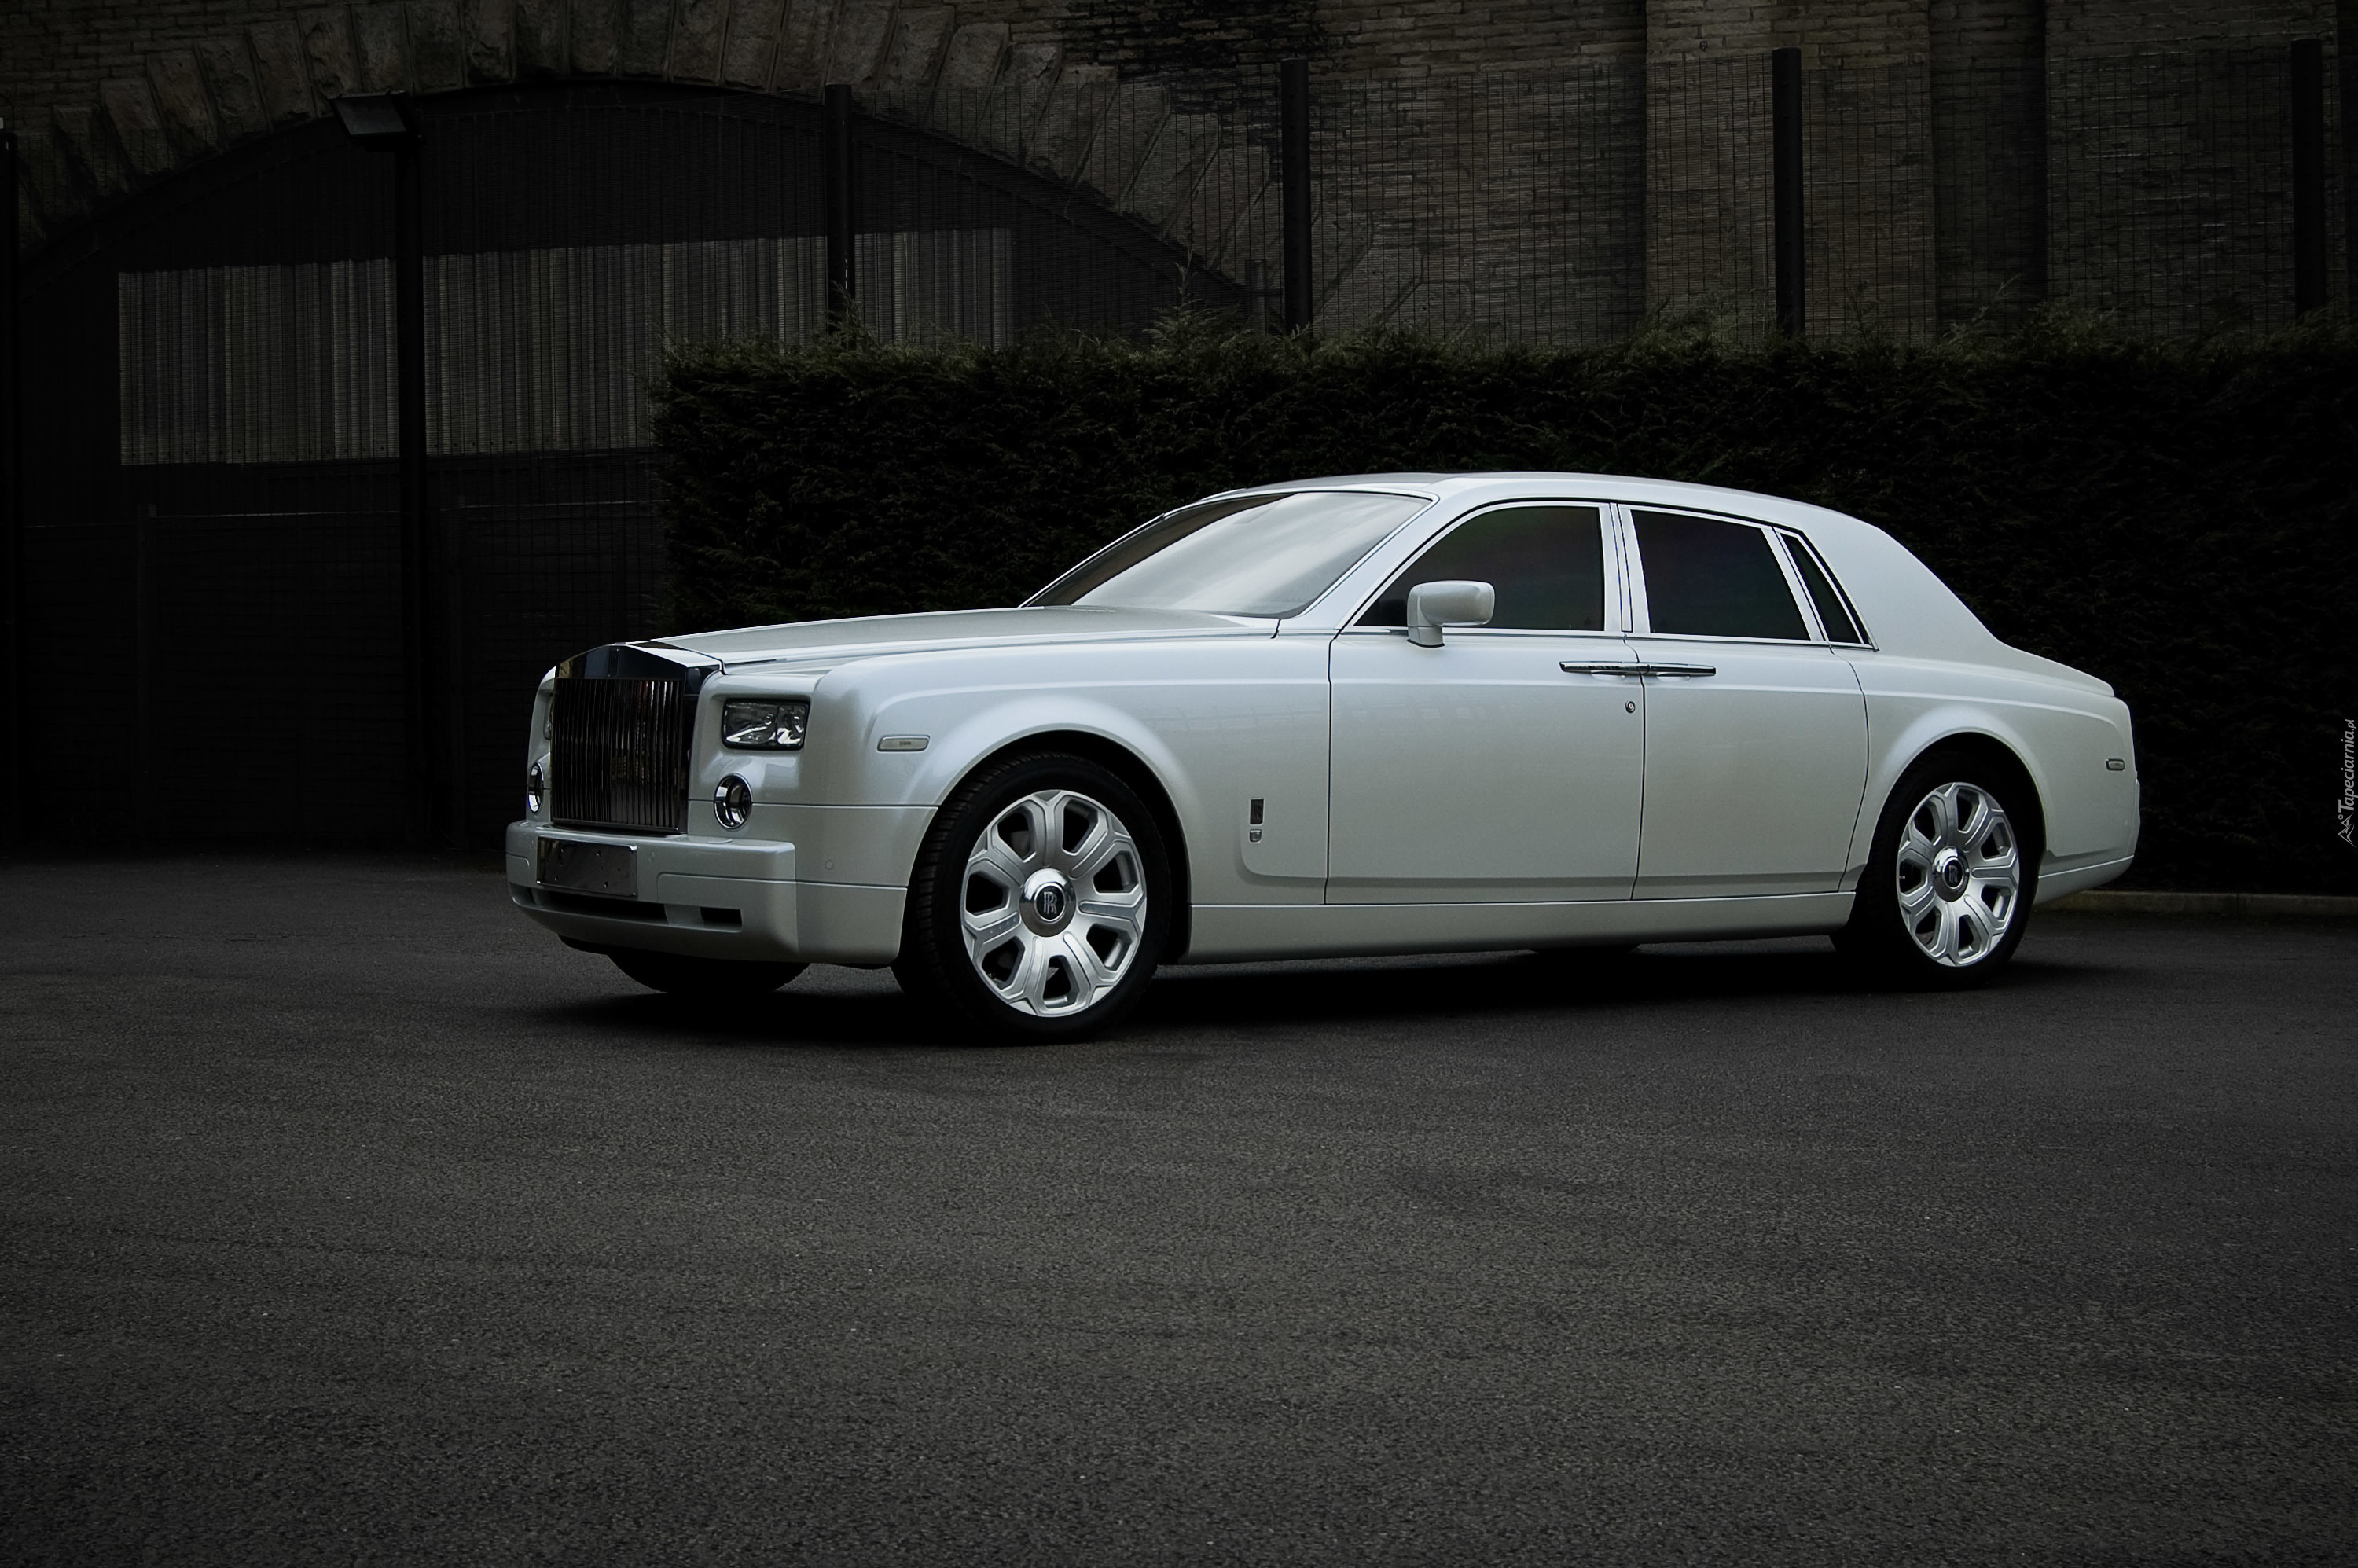 Car Rolls Royce Luxury Cars British Cars White Cars Side View Vehicle 3000x1995